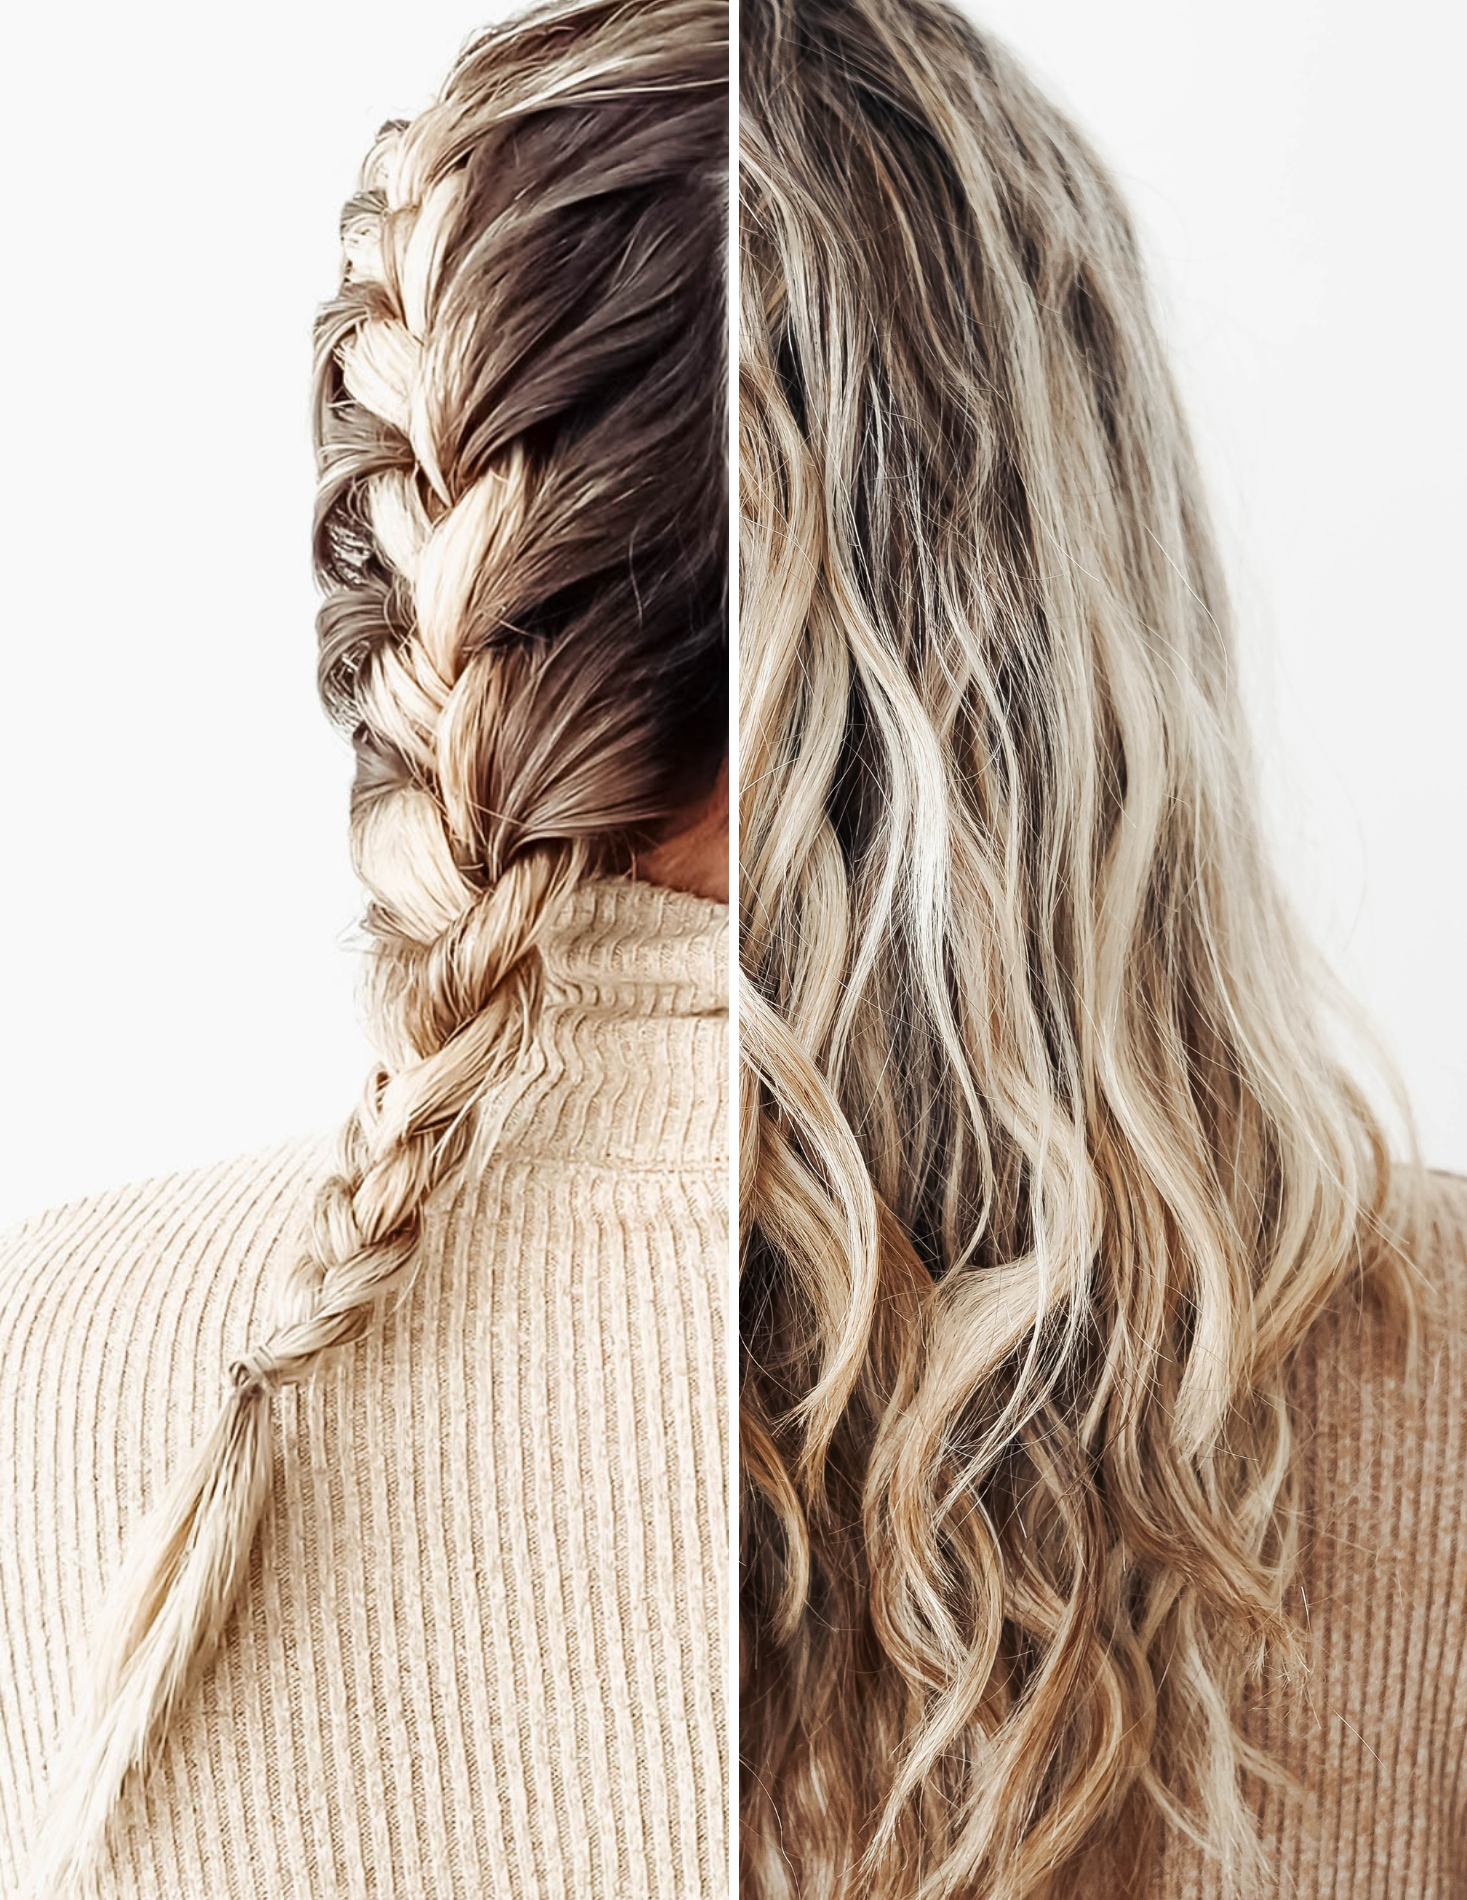 How To Braid Hair: 7 Types You Can Learn At Home